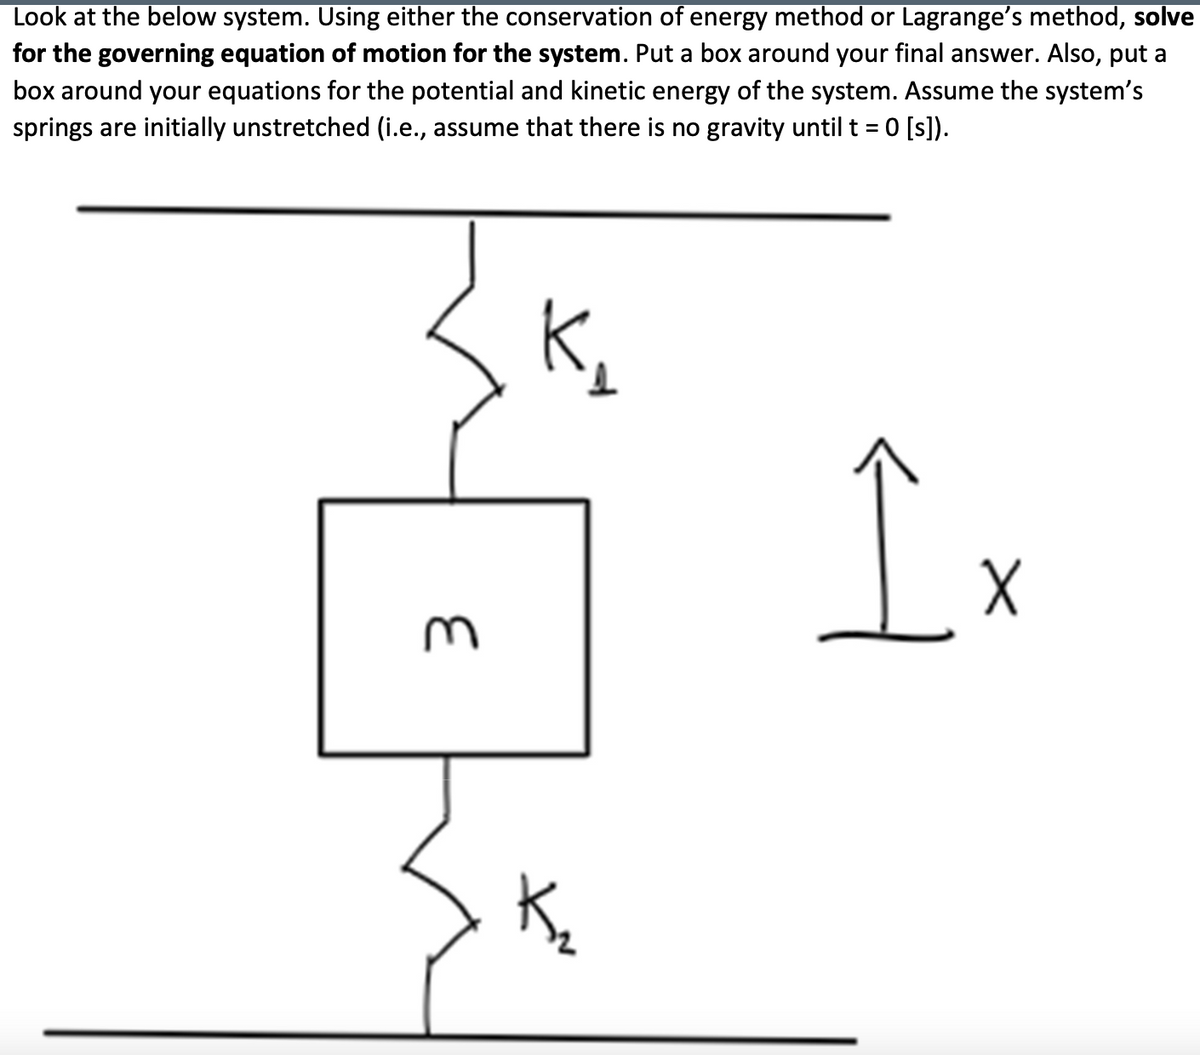 Look at the below system. Using either the conservation of energy method or Lagrange's method, solve
for the governing equation of motion for the system. Put a box around your final answer. Also, put a
box around your equations for the potential and kinetic energy of the system. Assume the system's
springs are initially unstretched (i.e., assume that there is no gravity until t = 0 [s]).
K₁
Î
E
K₂
X